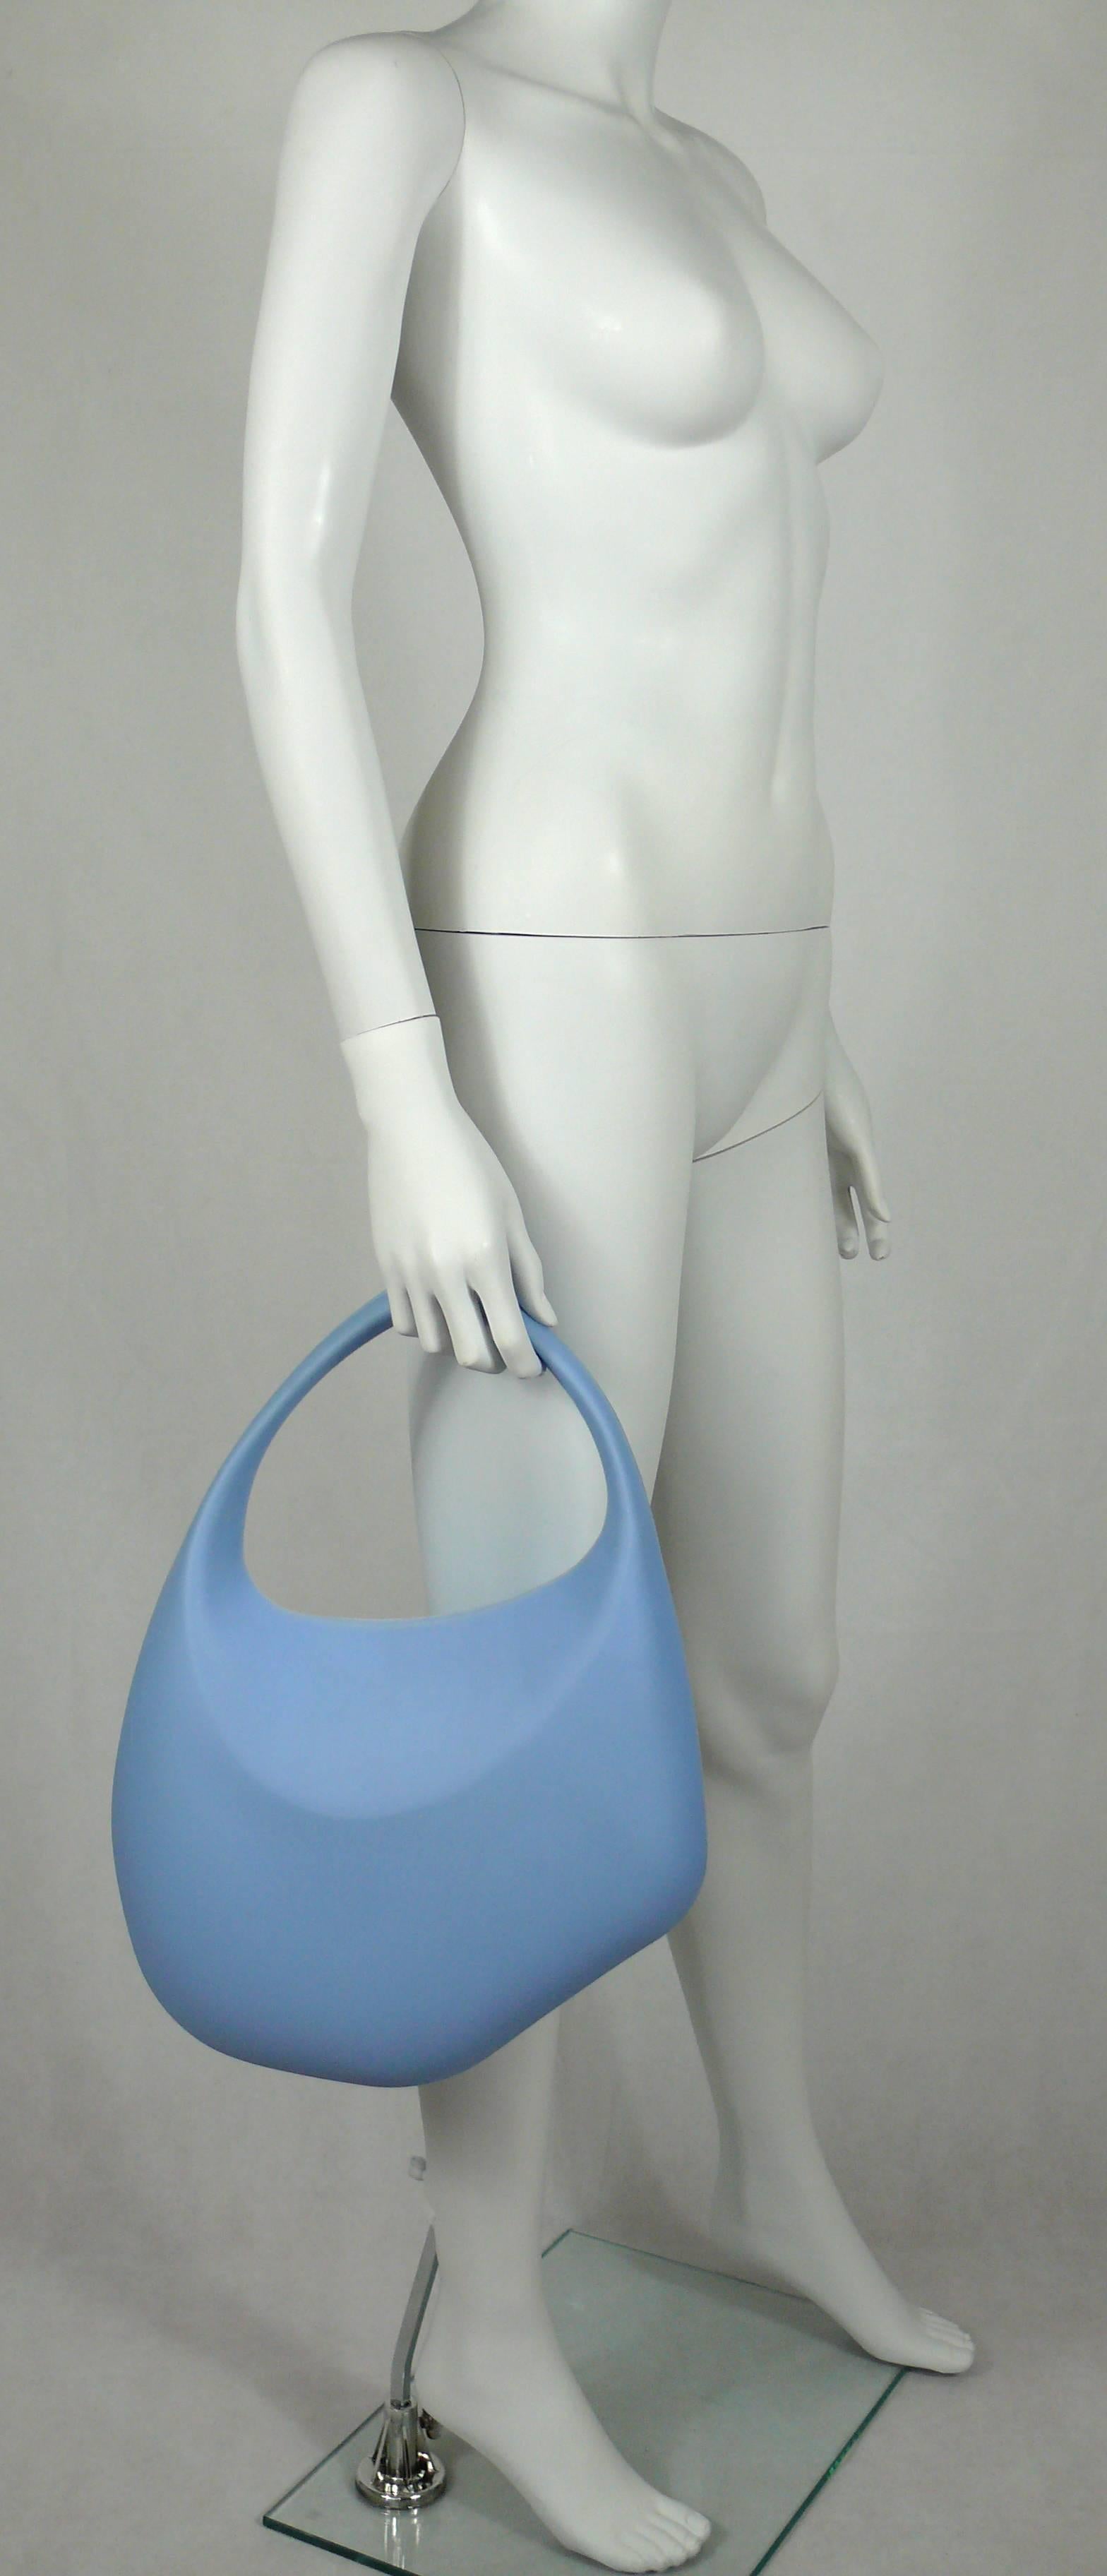 THIERRY MUGLER vintage iconic Bubble rubber handbag in a very rare blue color.

True color is difficult to photograph. Exact color is close to THIERRY MUGLER's signature ice blue.

Organic shape.
Metal ball snap closure, embossed with THIERRY MUGLER